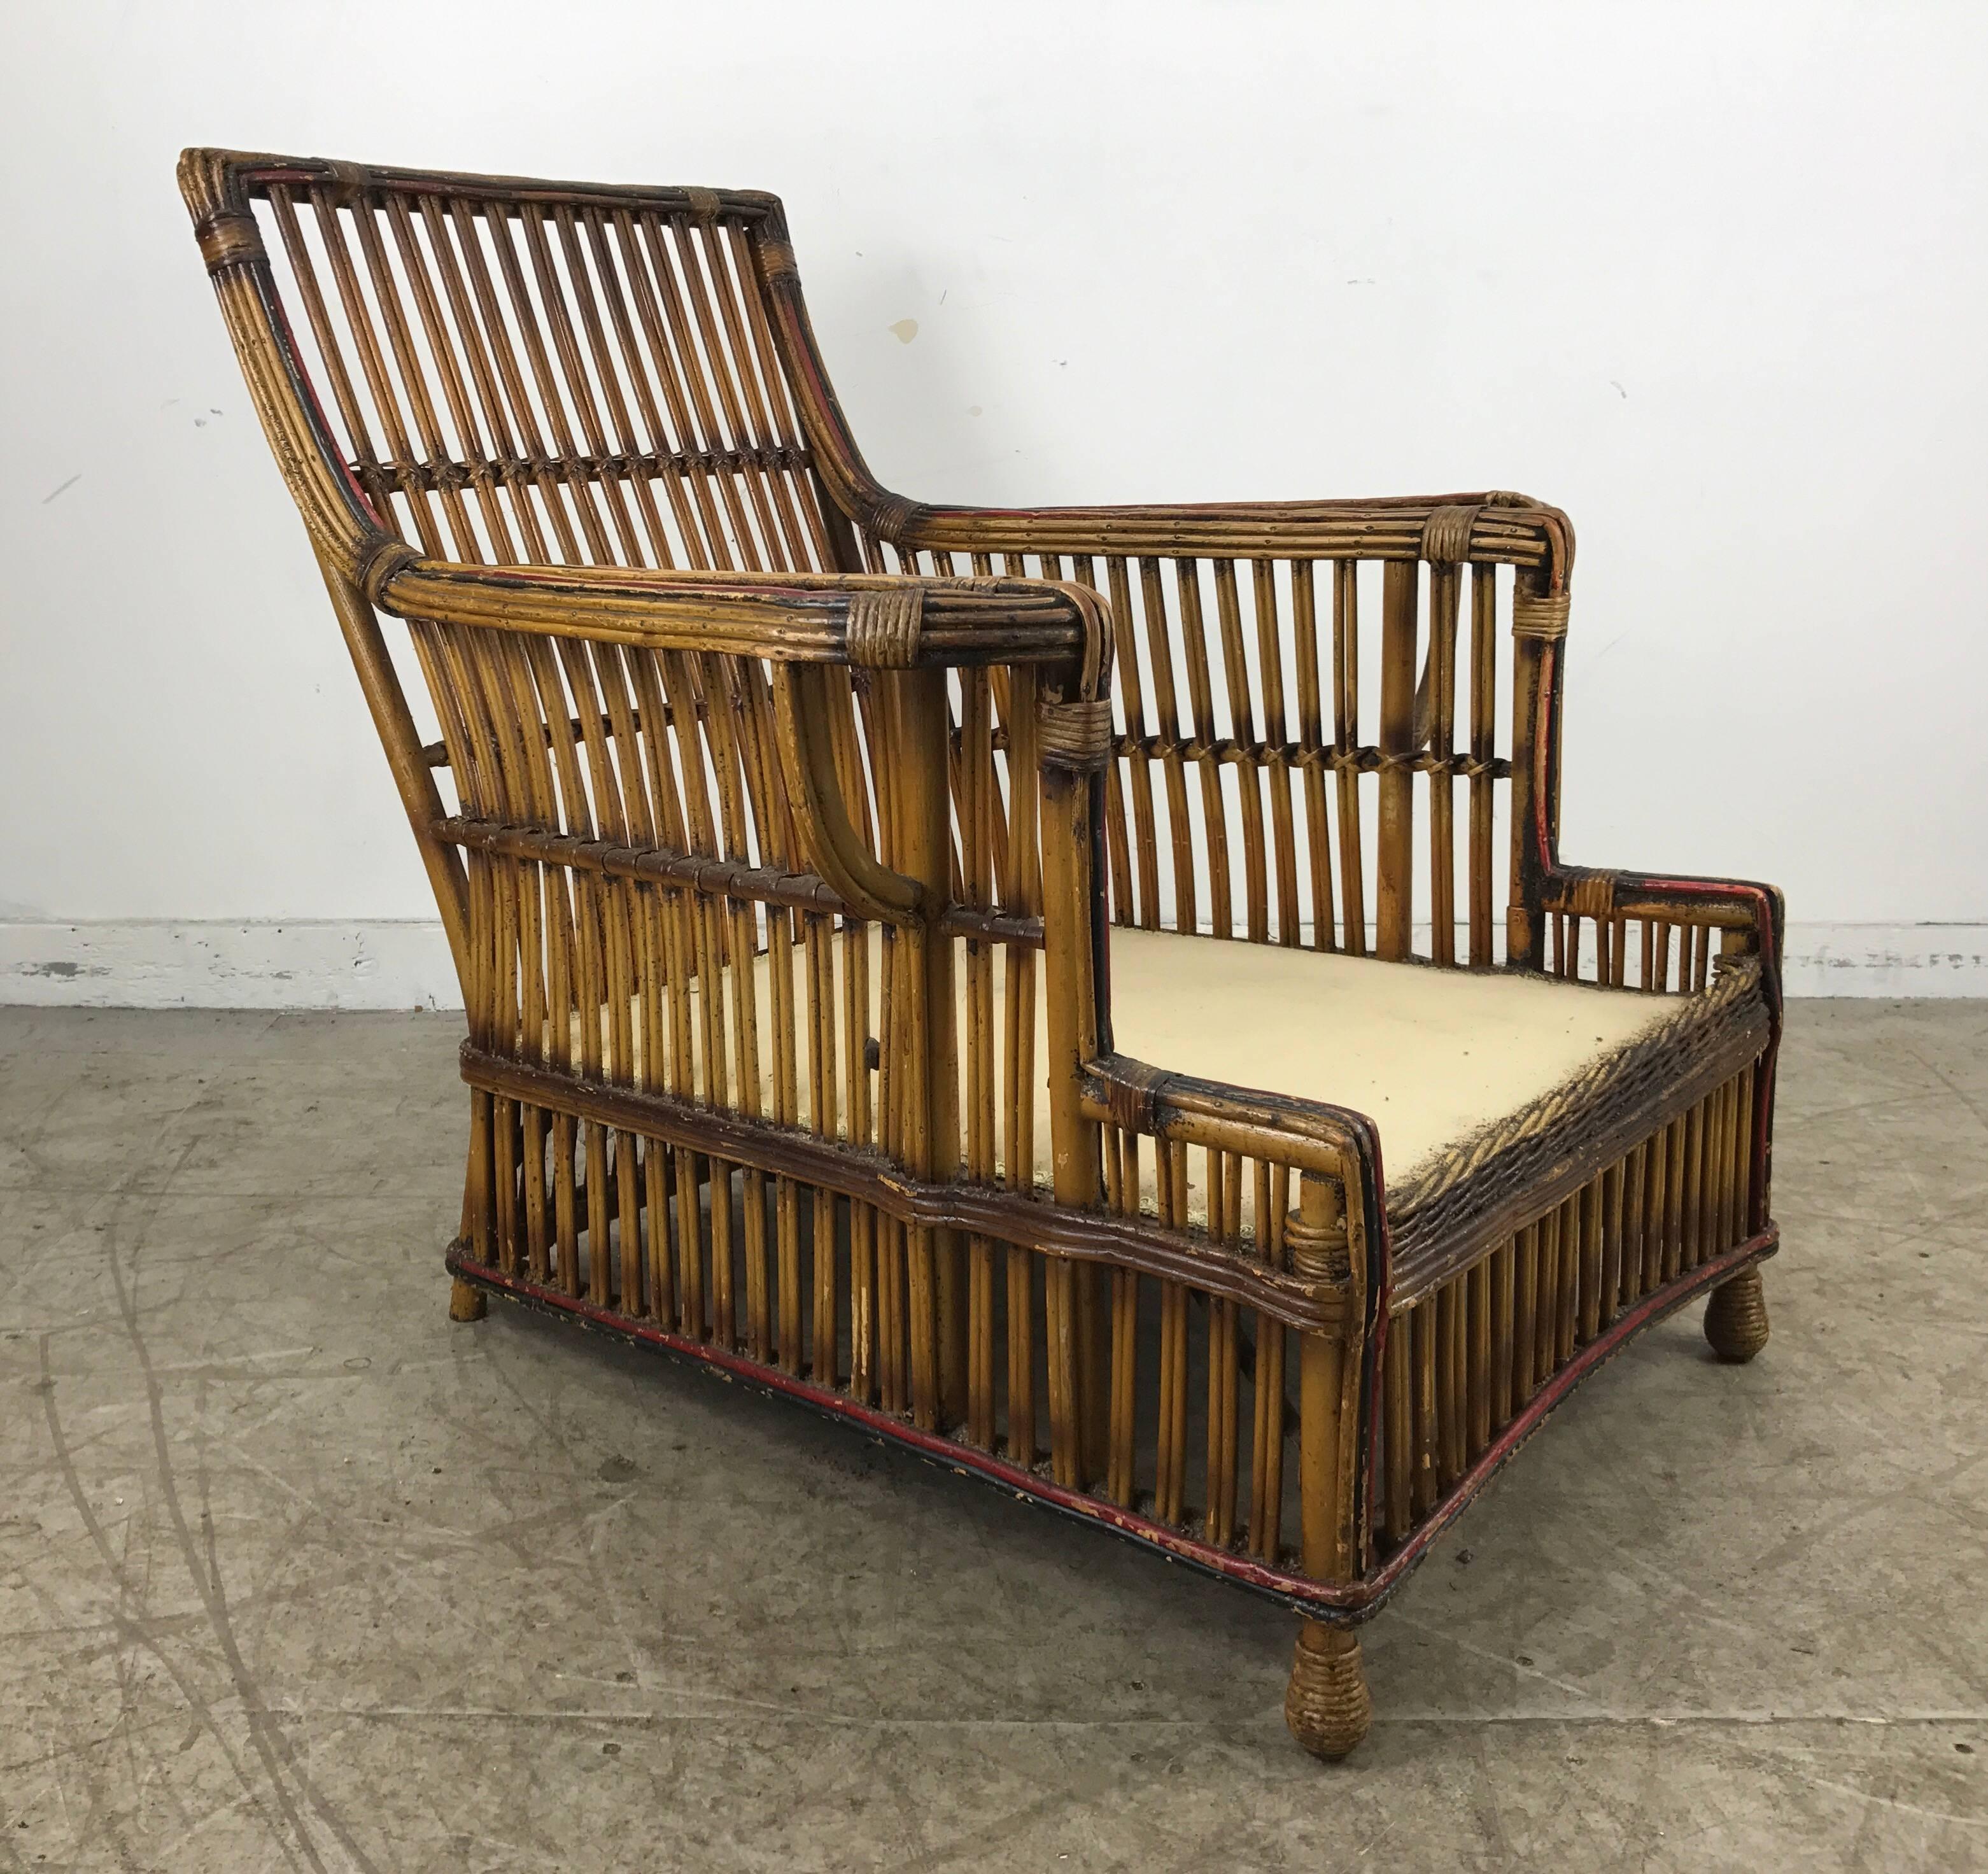 Stunning art deco split reed / stick wicker lounge chair by Niagara Reedcraft Inc. Niagara falls NY, retains original natural finish accented by red and black detailing, superior quality and construction, also available matching three-seat sofa,